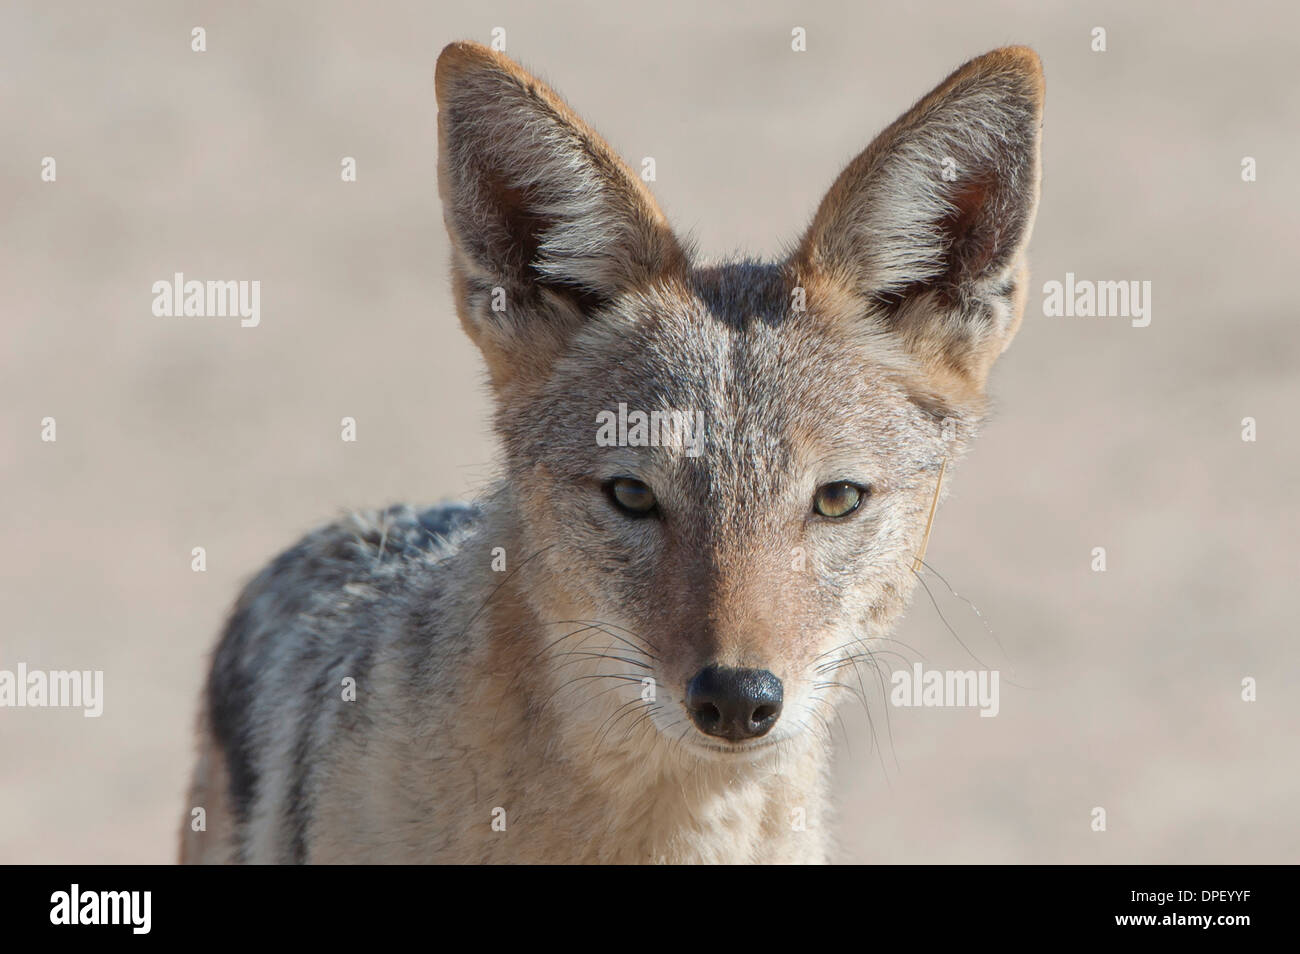 Black-backed jackal (Canis mesomelas), Kgalagadi Transfrontier Park, Northern Cape, South Africa Stock Photo